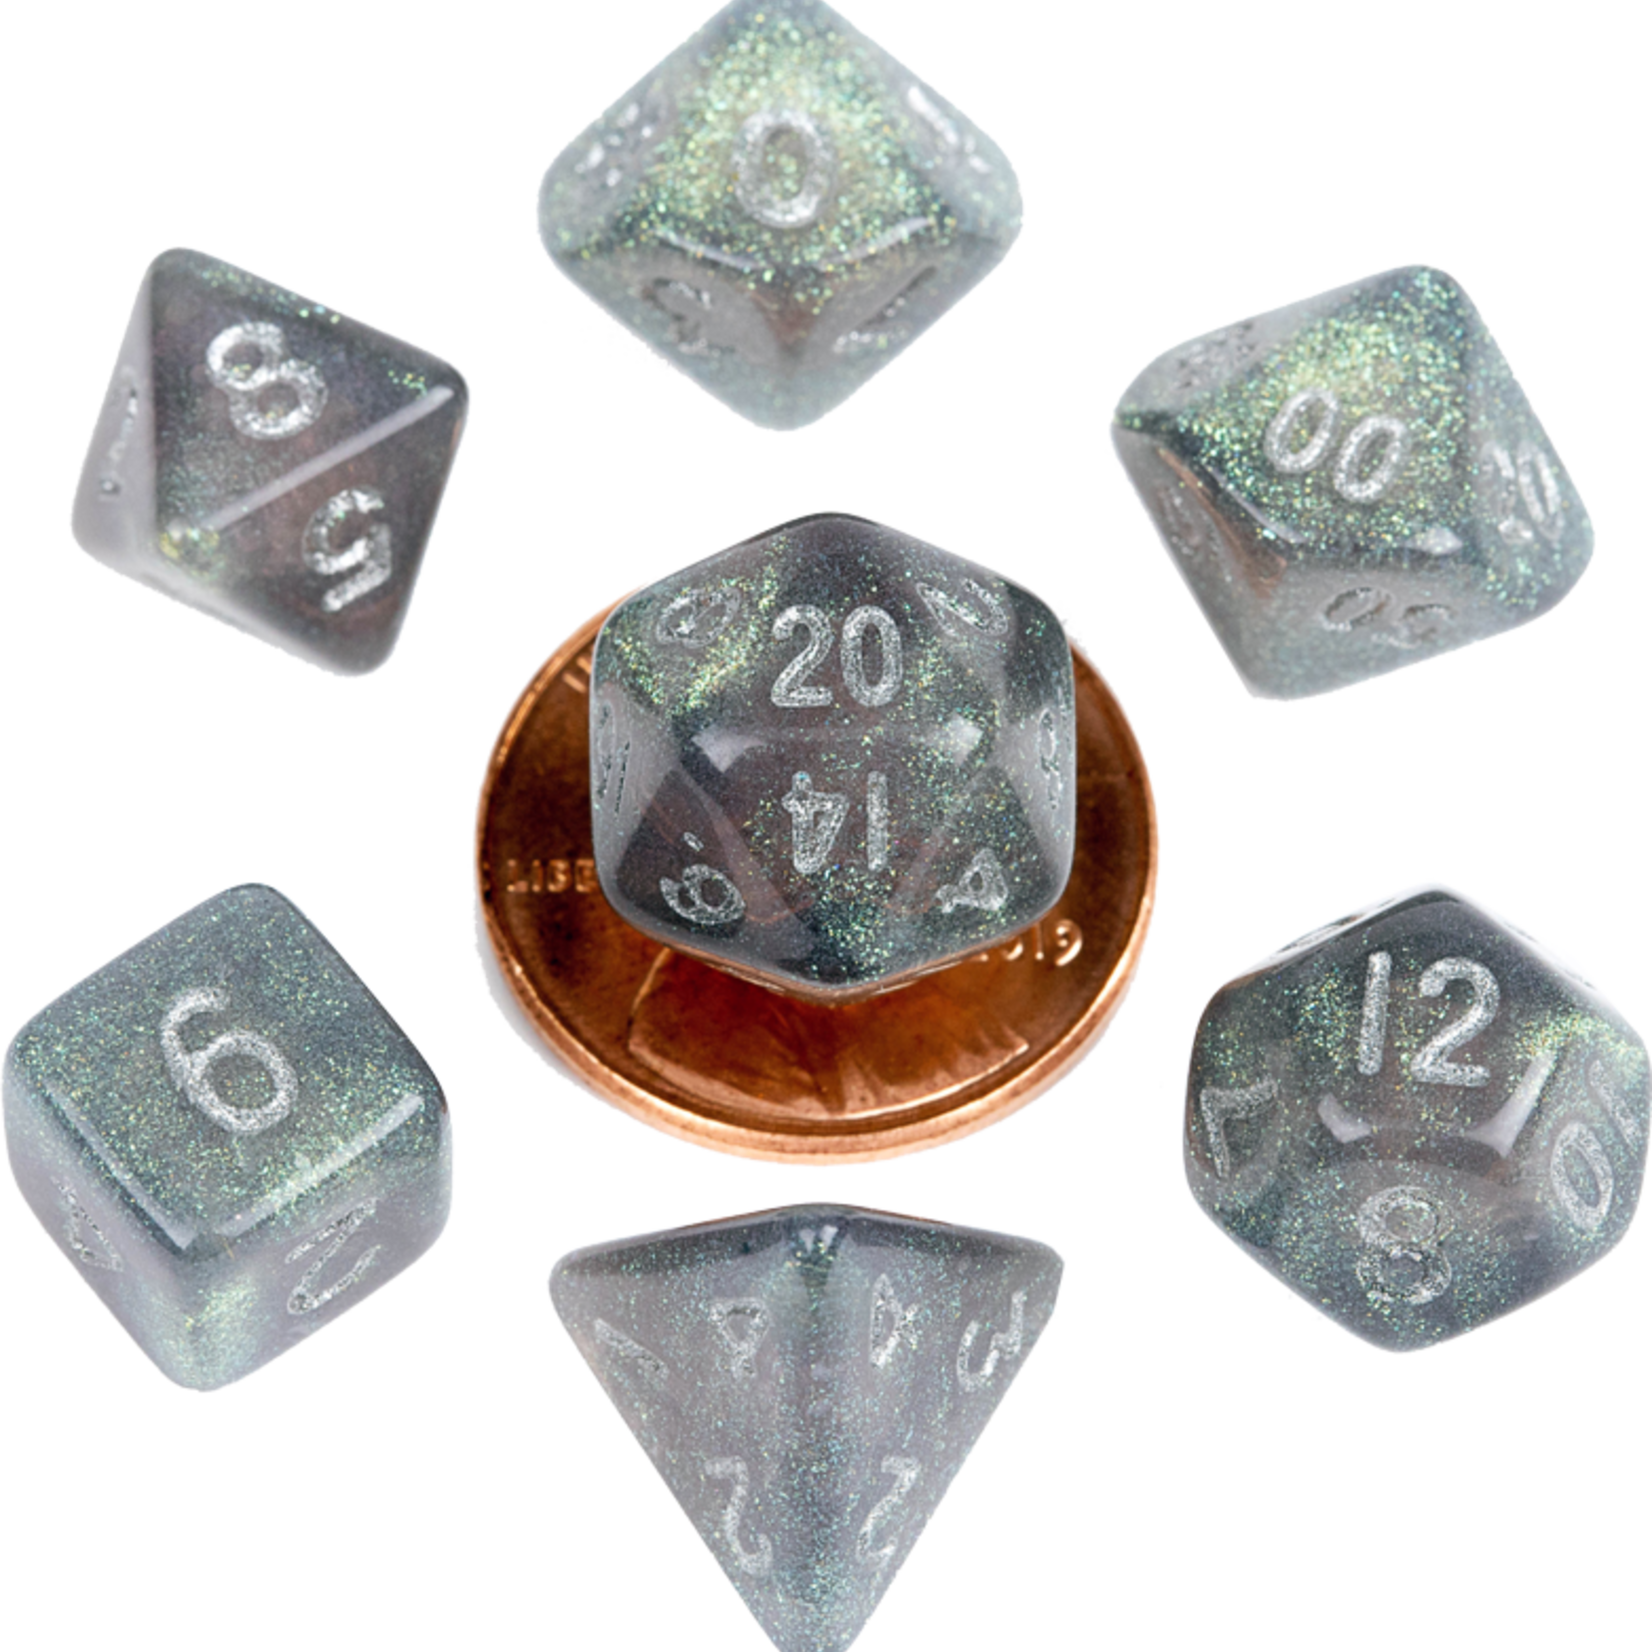 Metallic Dice Games MDG Acrylic 10mm Mini 7-Die Set Stardust Gray with Silver Numbers